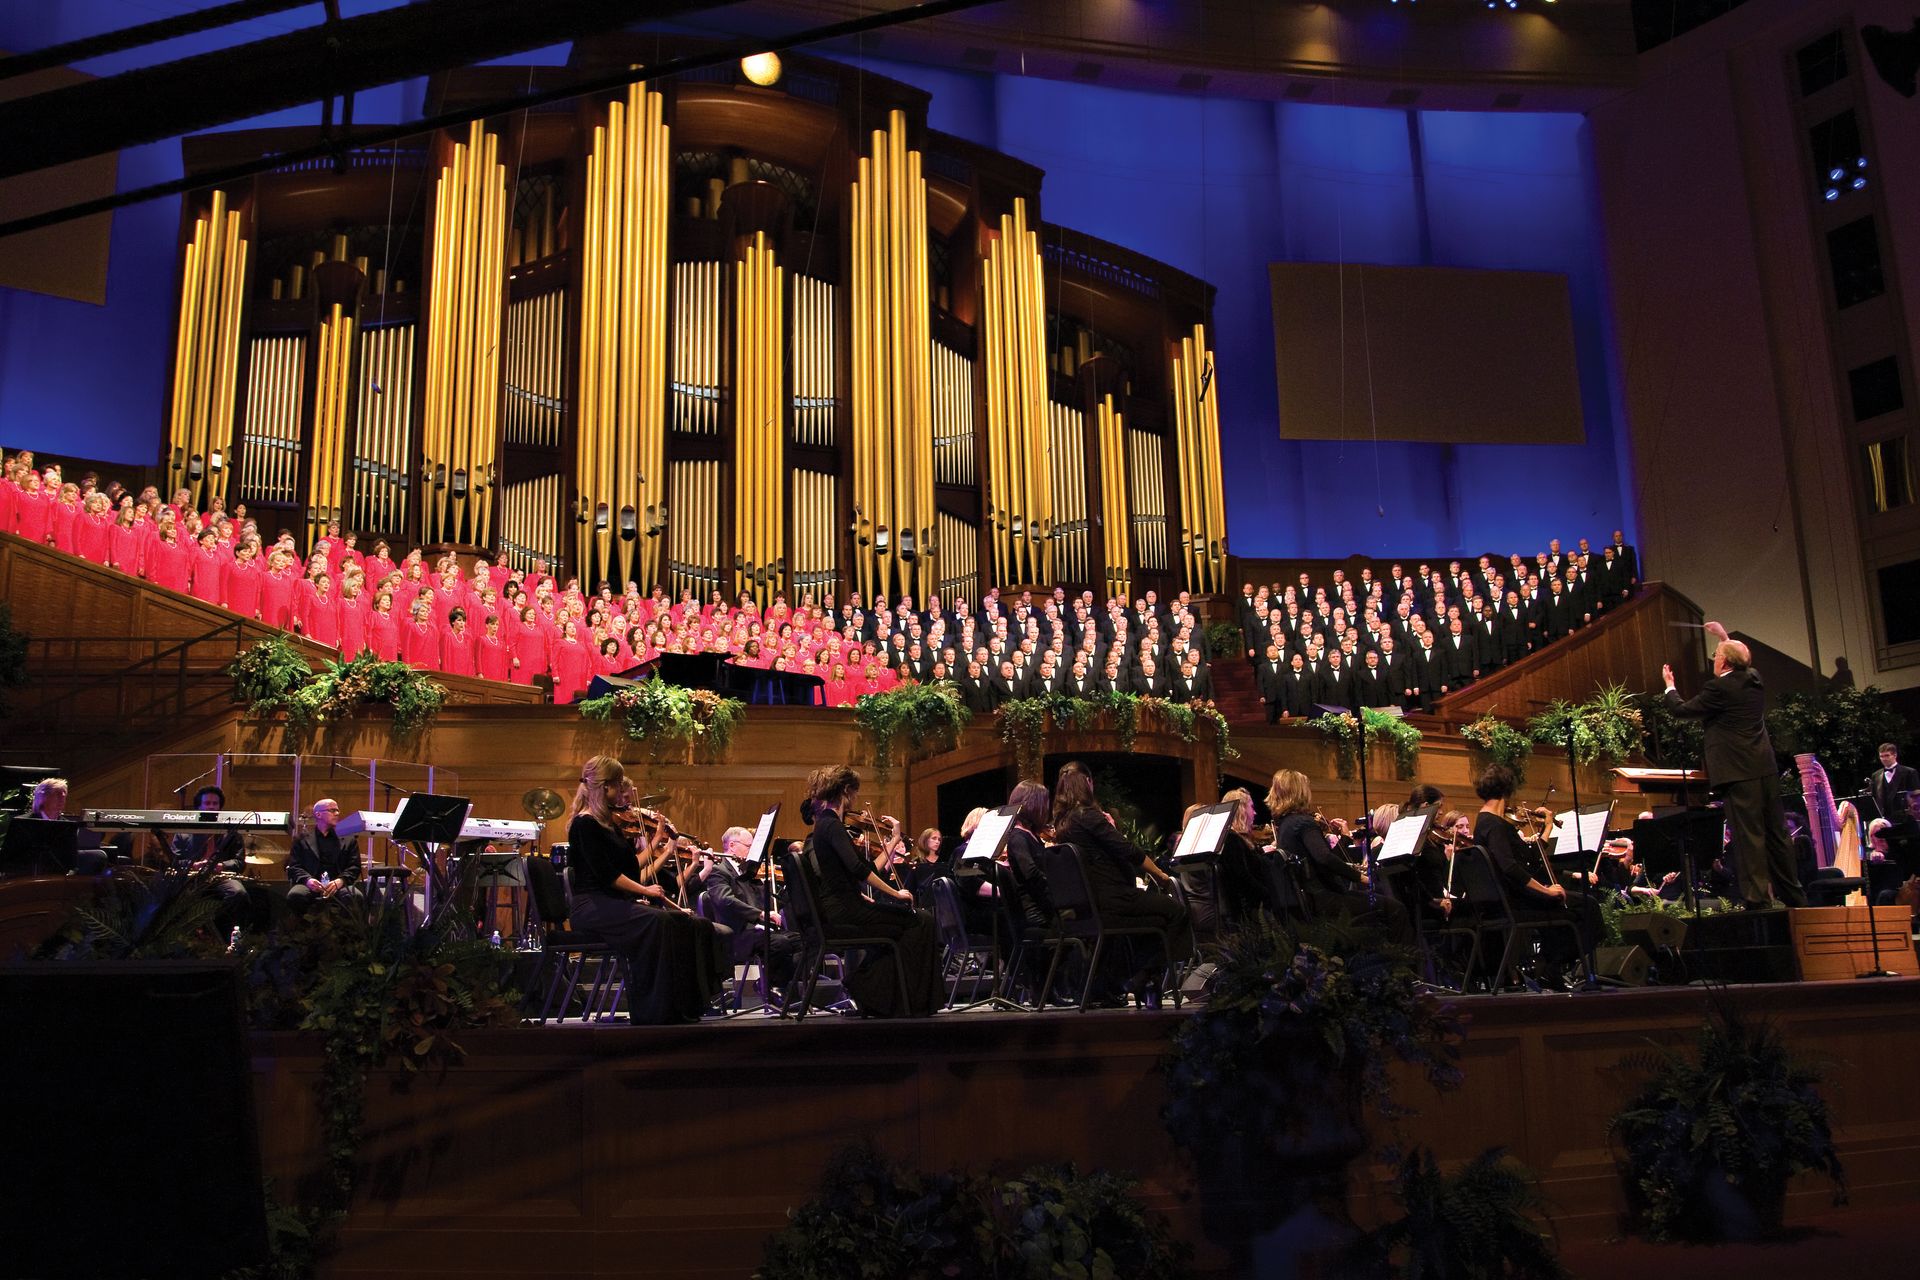 The Mormon Tabernacle Choir and orchestra performing at the Pioneer Day Commemoration Concert.